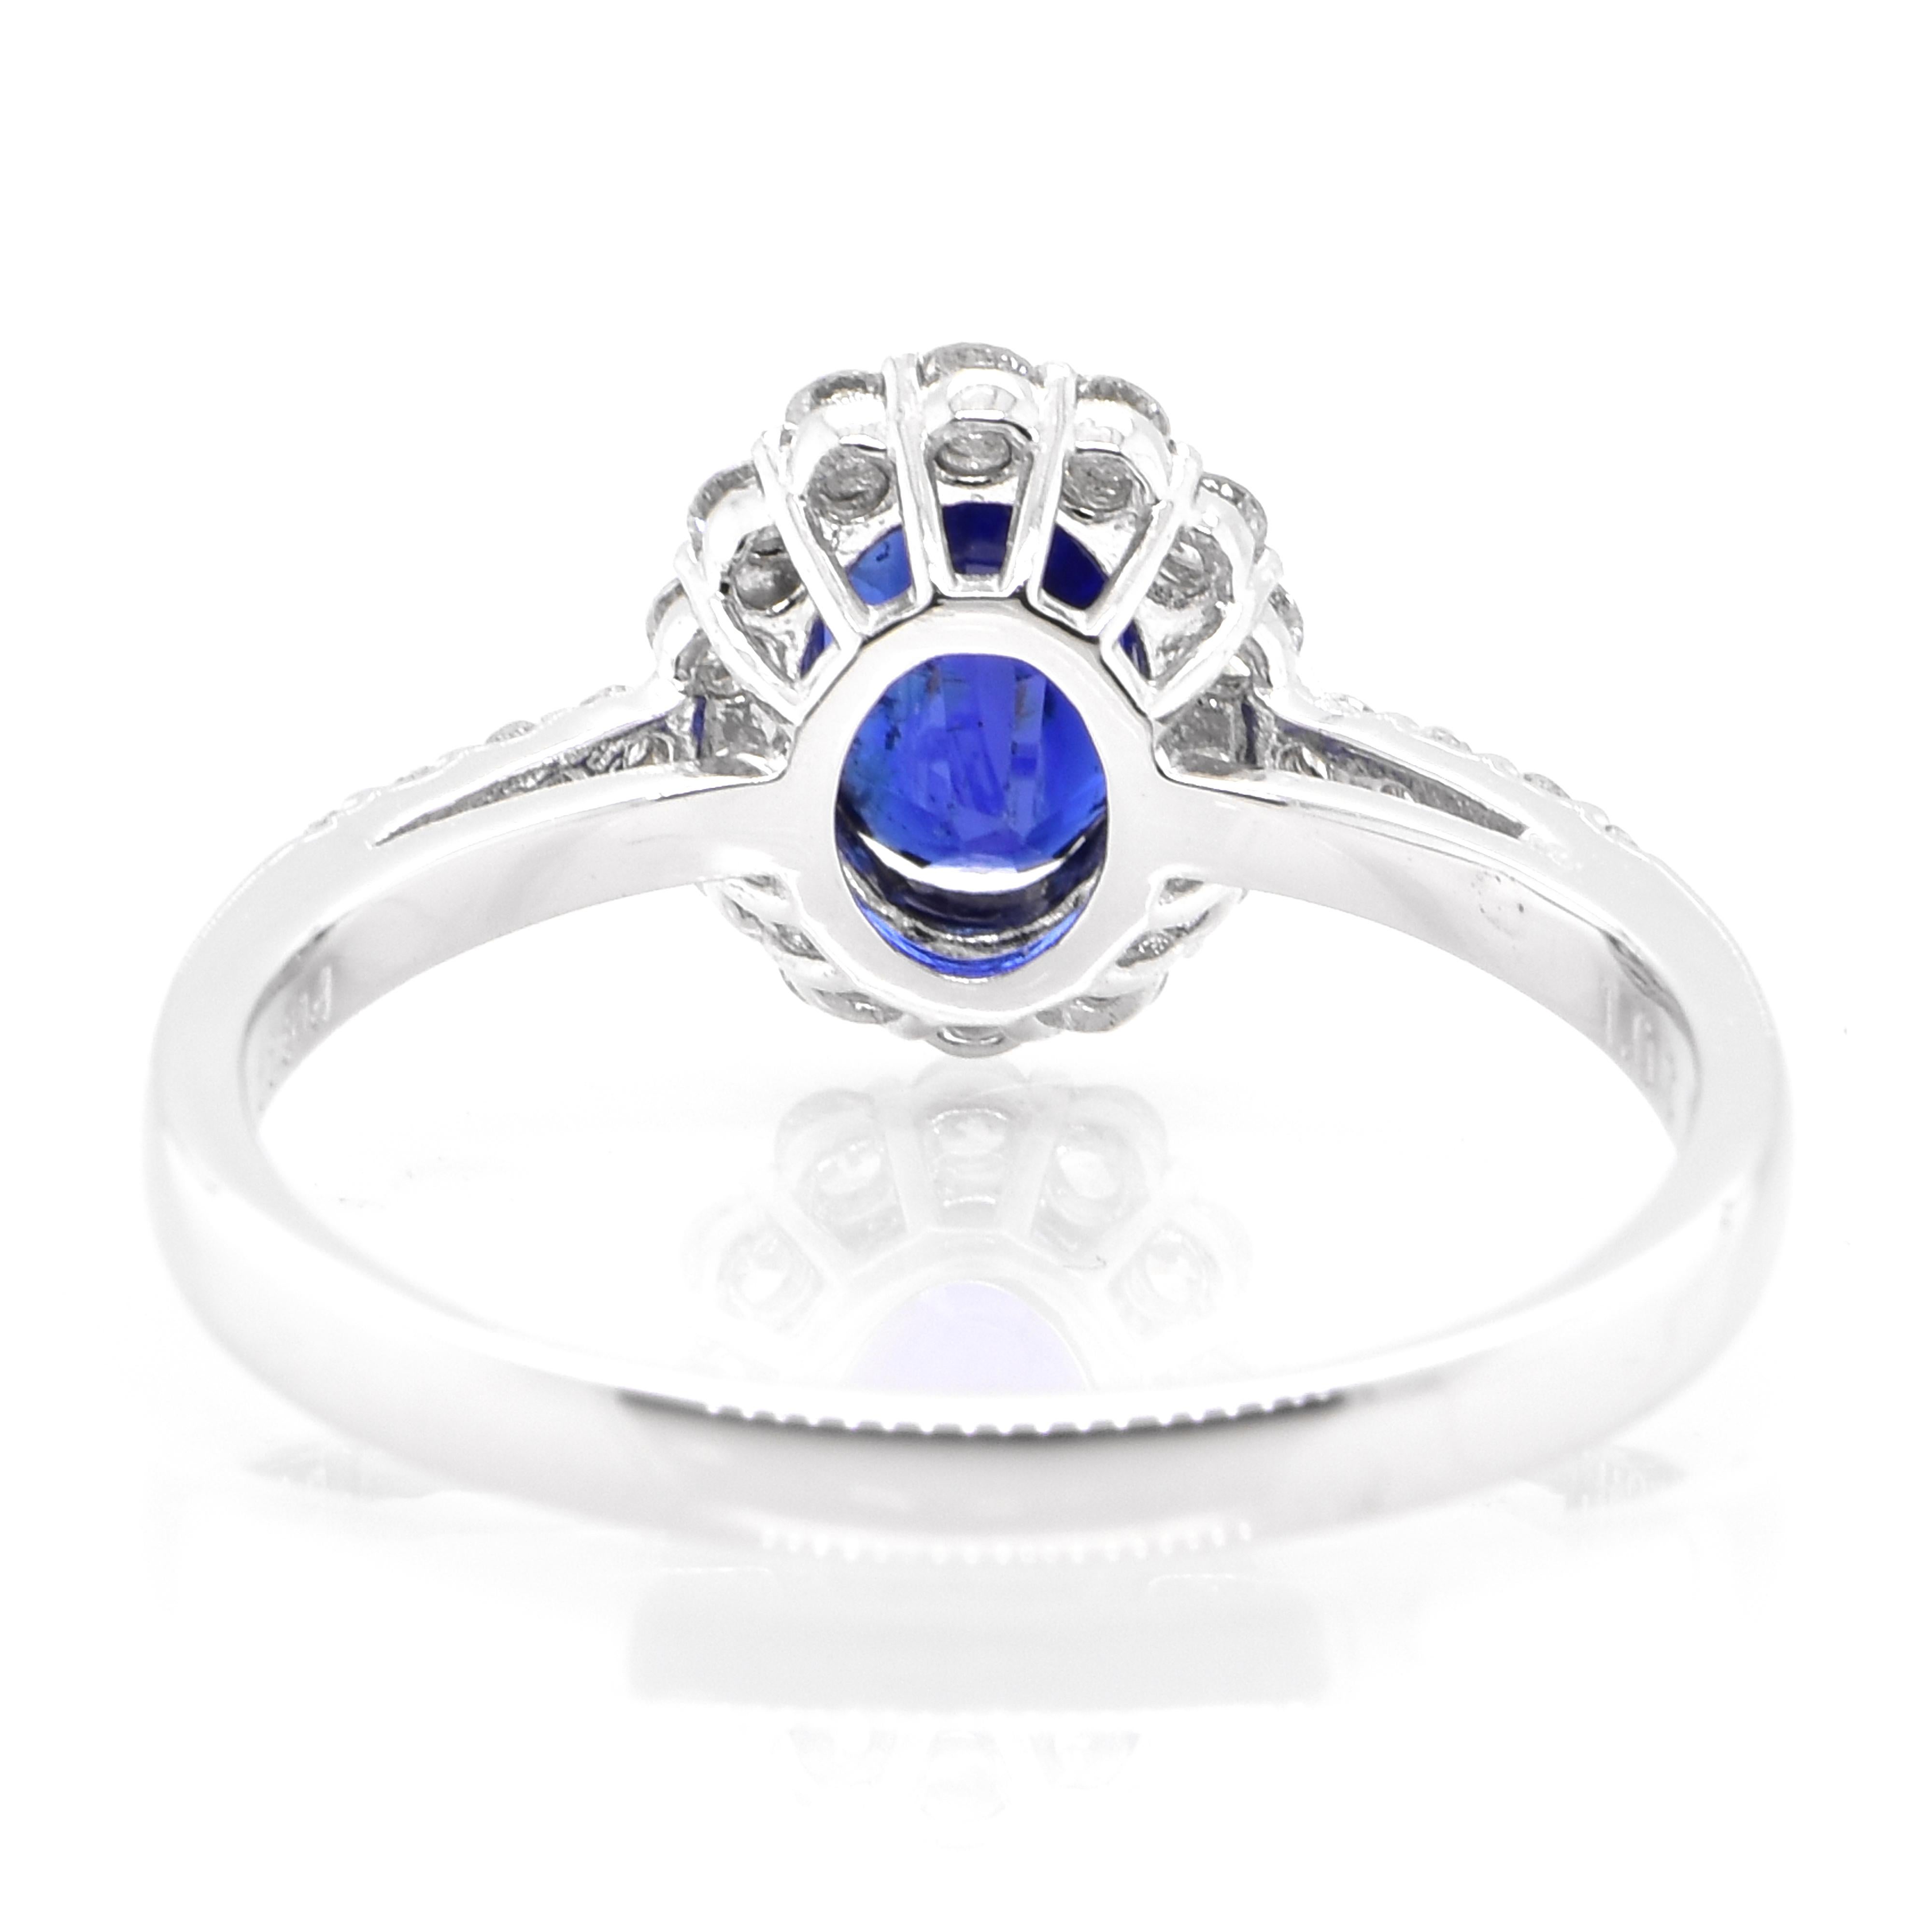 Women's 1.07 Carat, Unheated, Royal Blue Color Sapphire and Diamond Ring Set in Platinum For Sale